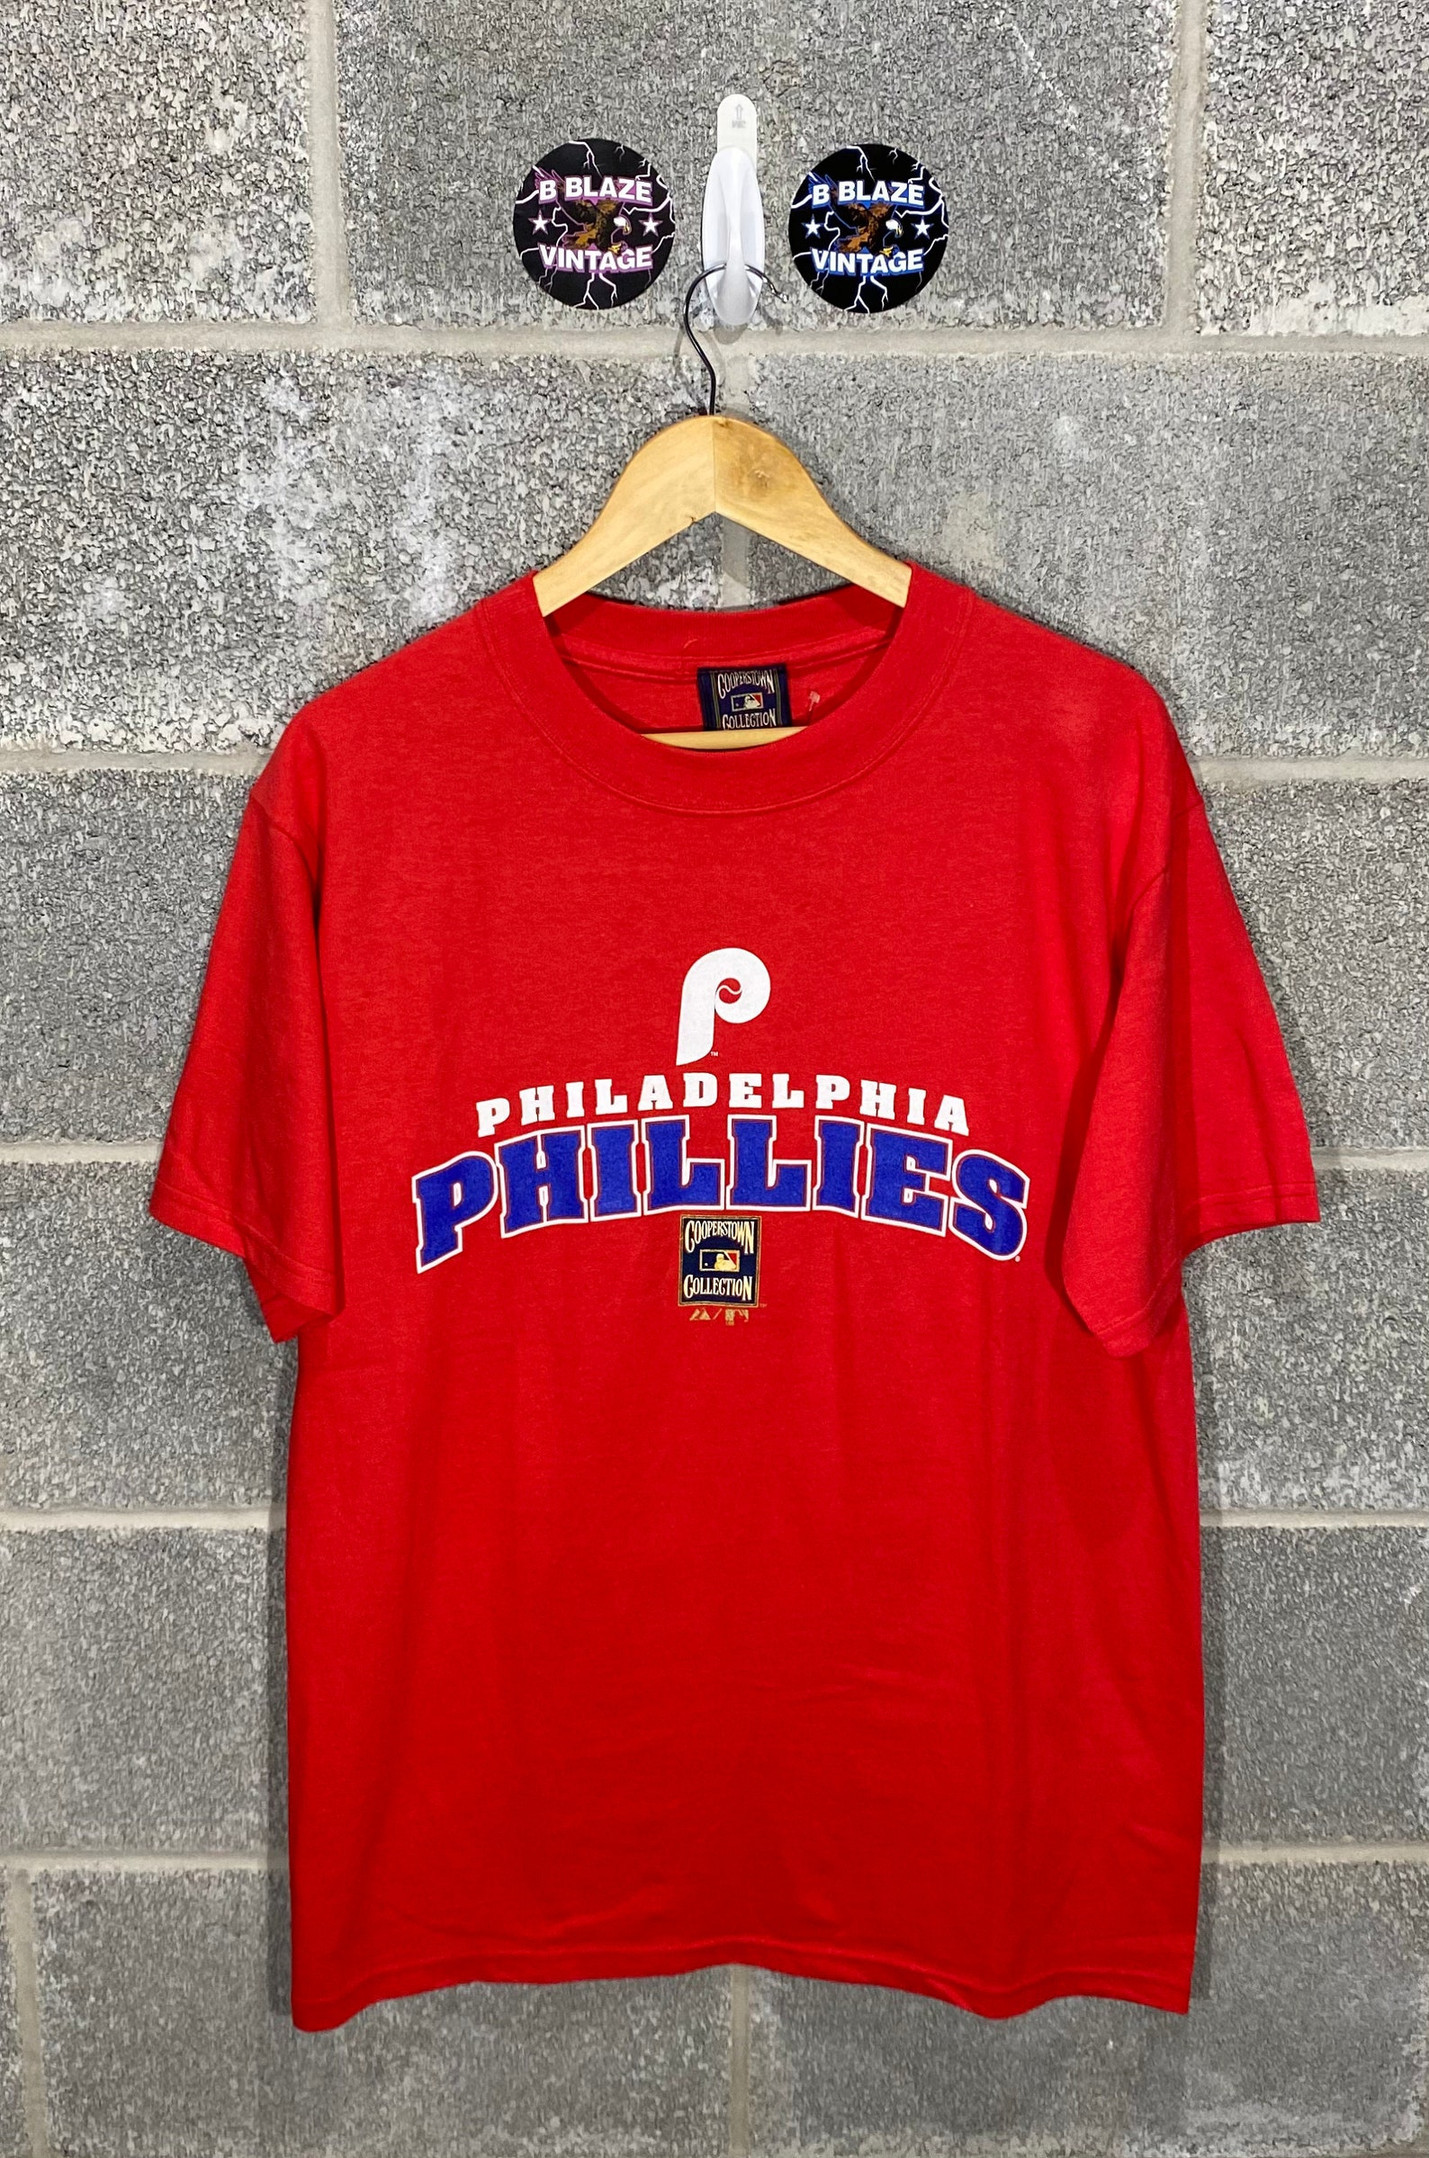 Vintage 2000s Philadelphia Phillies Baseball Red Cooperstown Collection Red Graphic T shirt